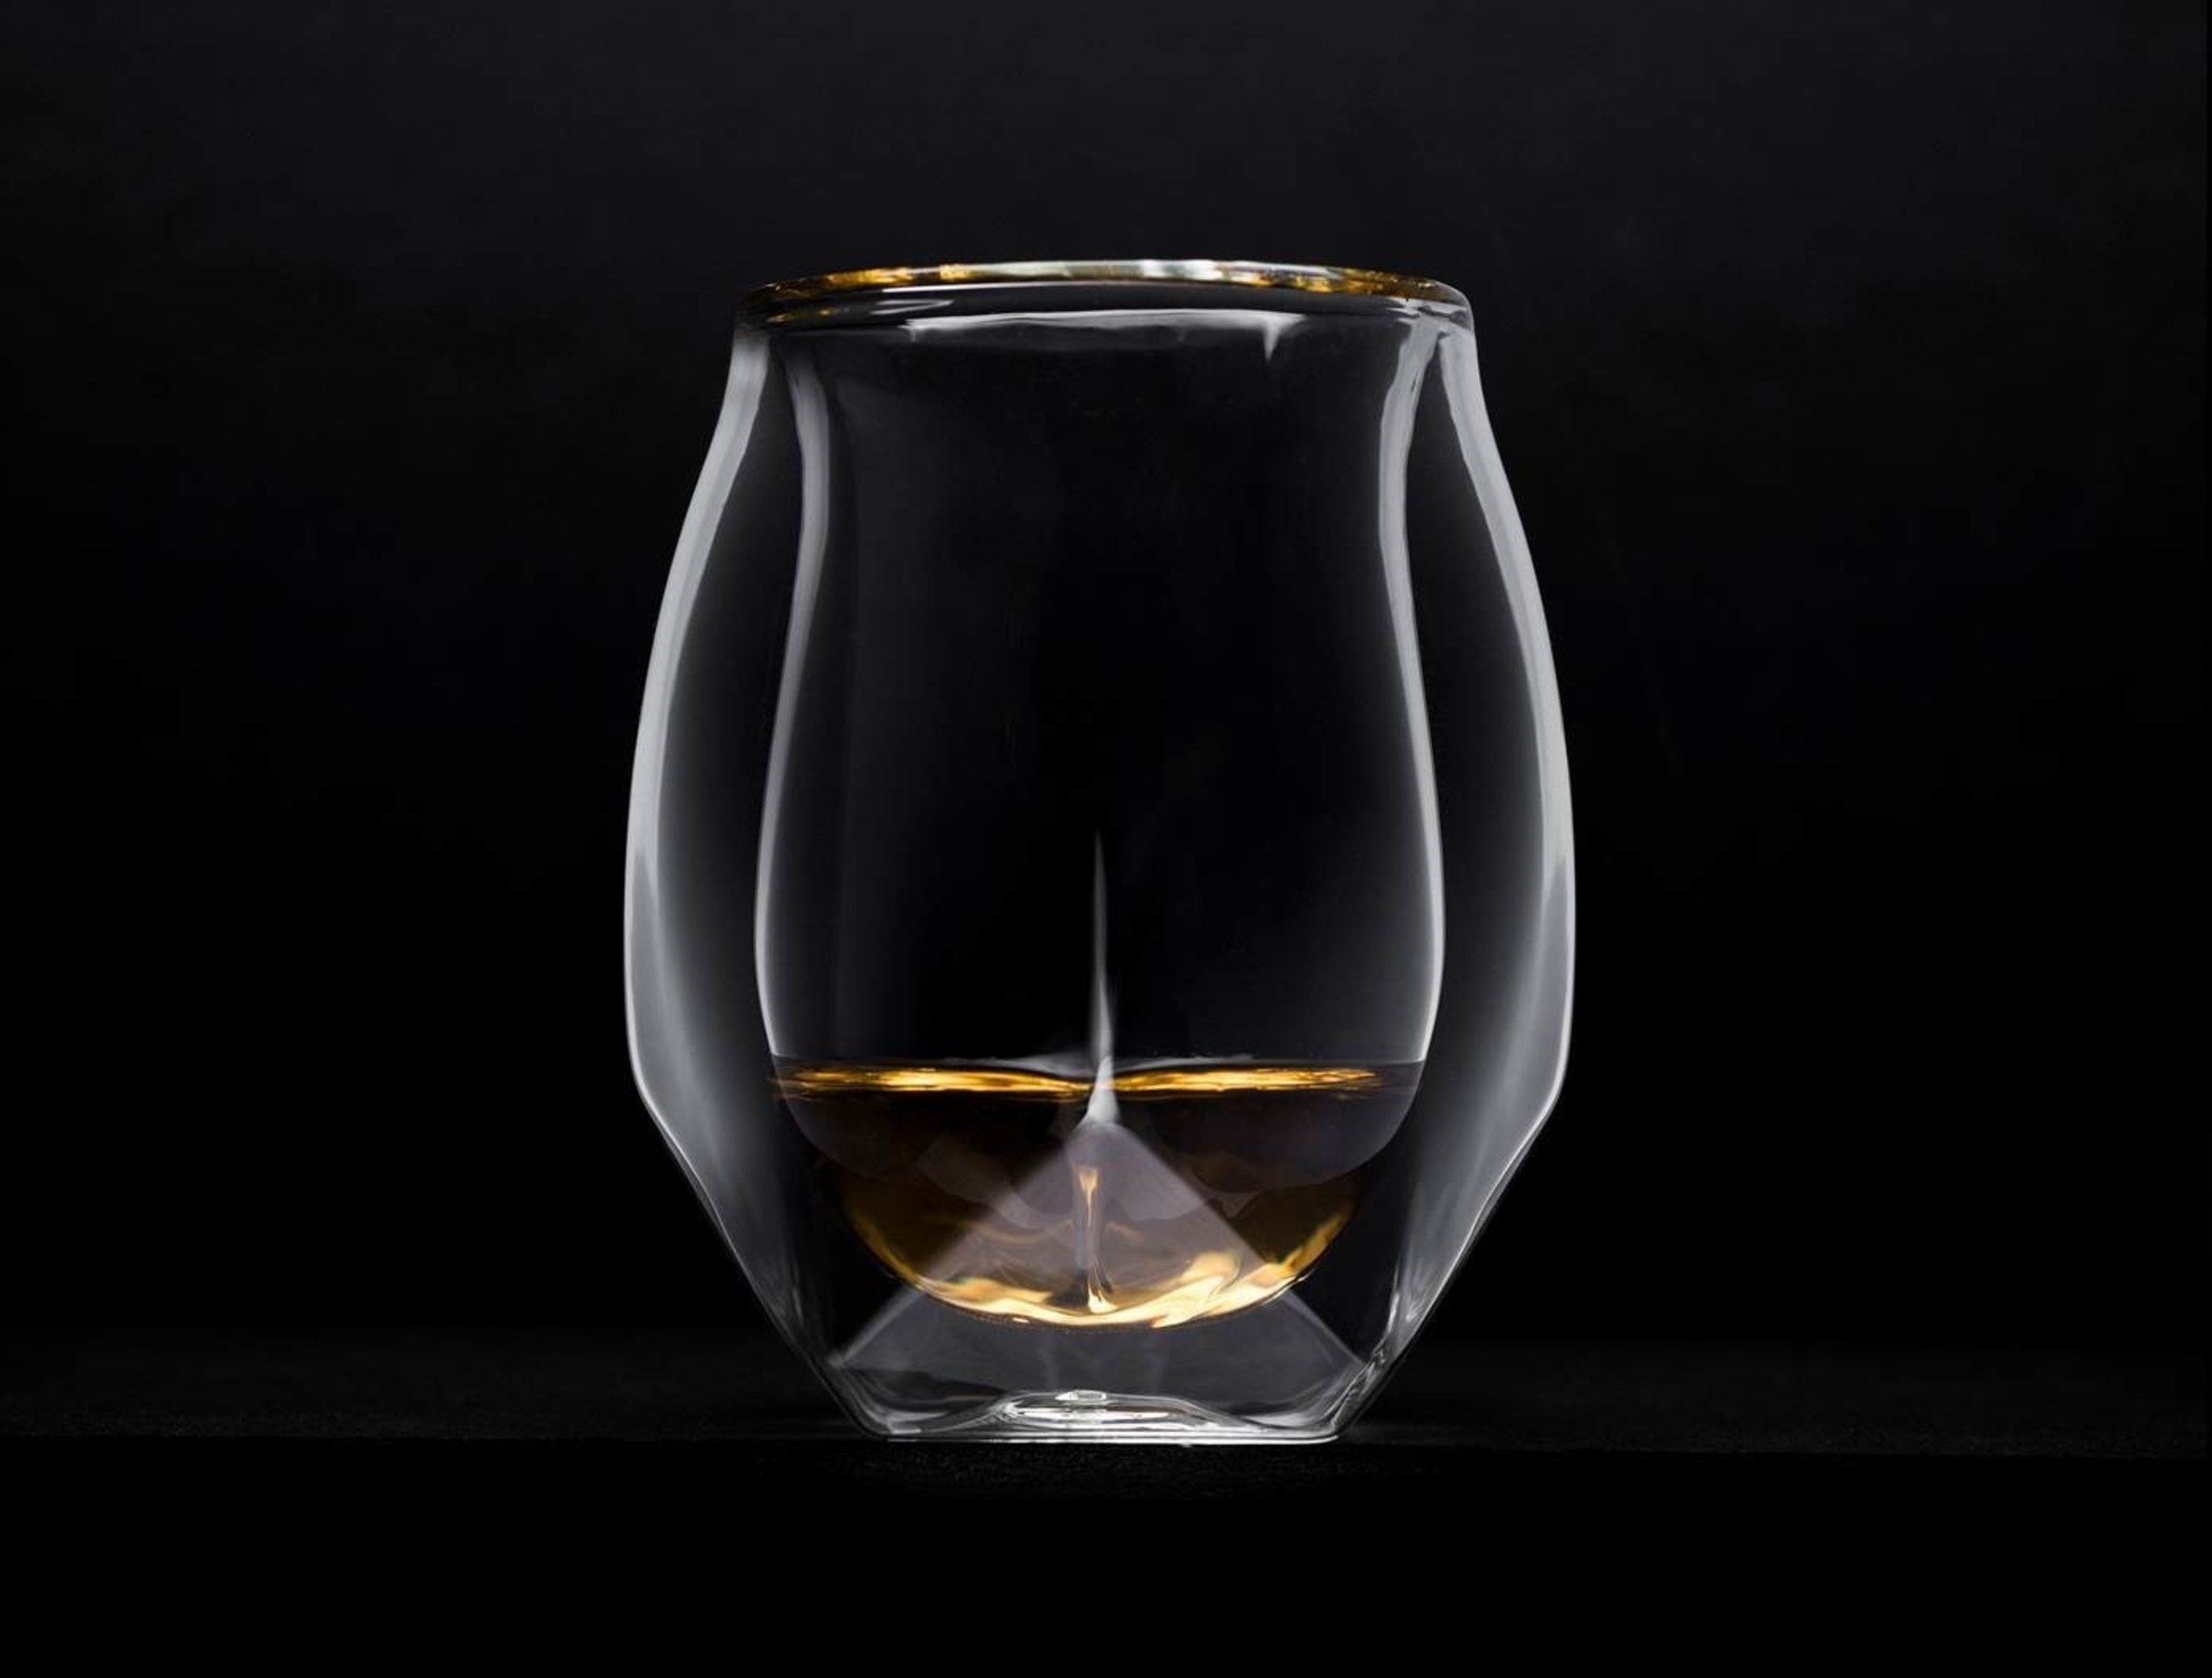 Norlan Whisky Glass - transforms the way whisky is enjoyed through a combination of the advanced aromatic delivery of a snifter with the aesthetic virtues of a tumbler. The glass is to be the flagship release in an evolving suite of products dedicated to modernizing the whisky drinking experience.